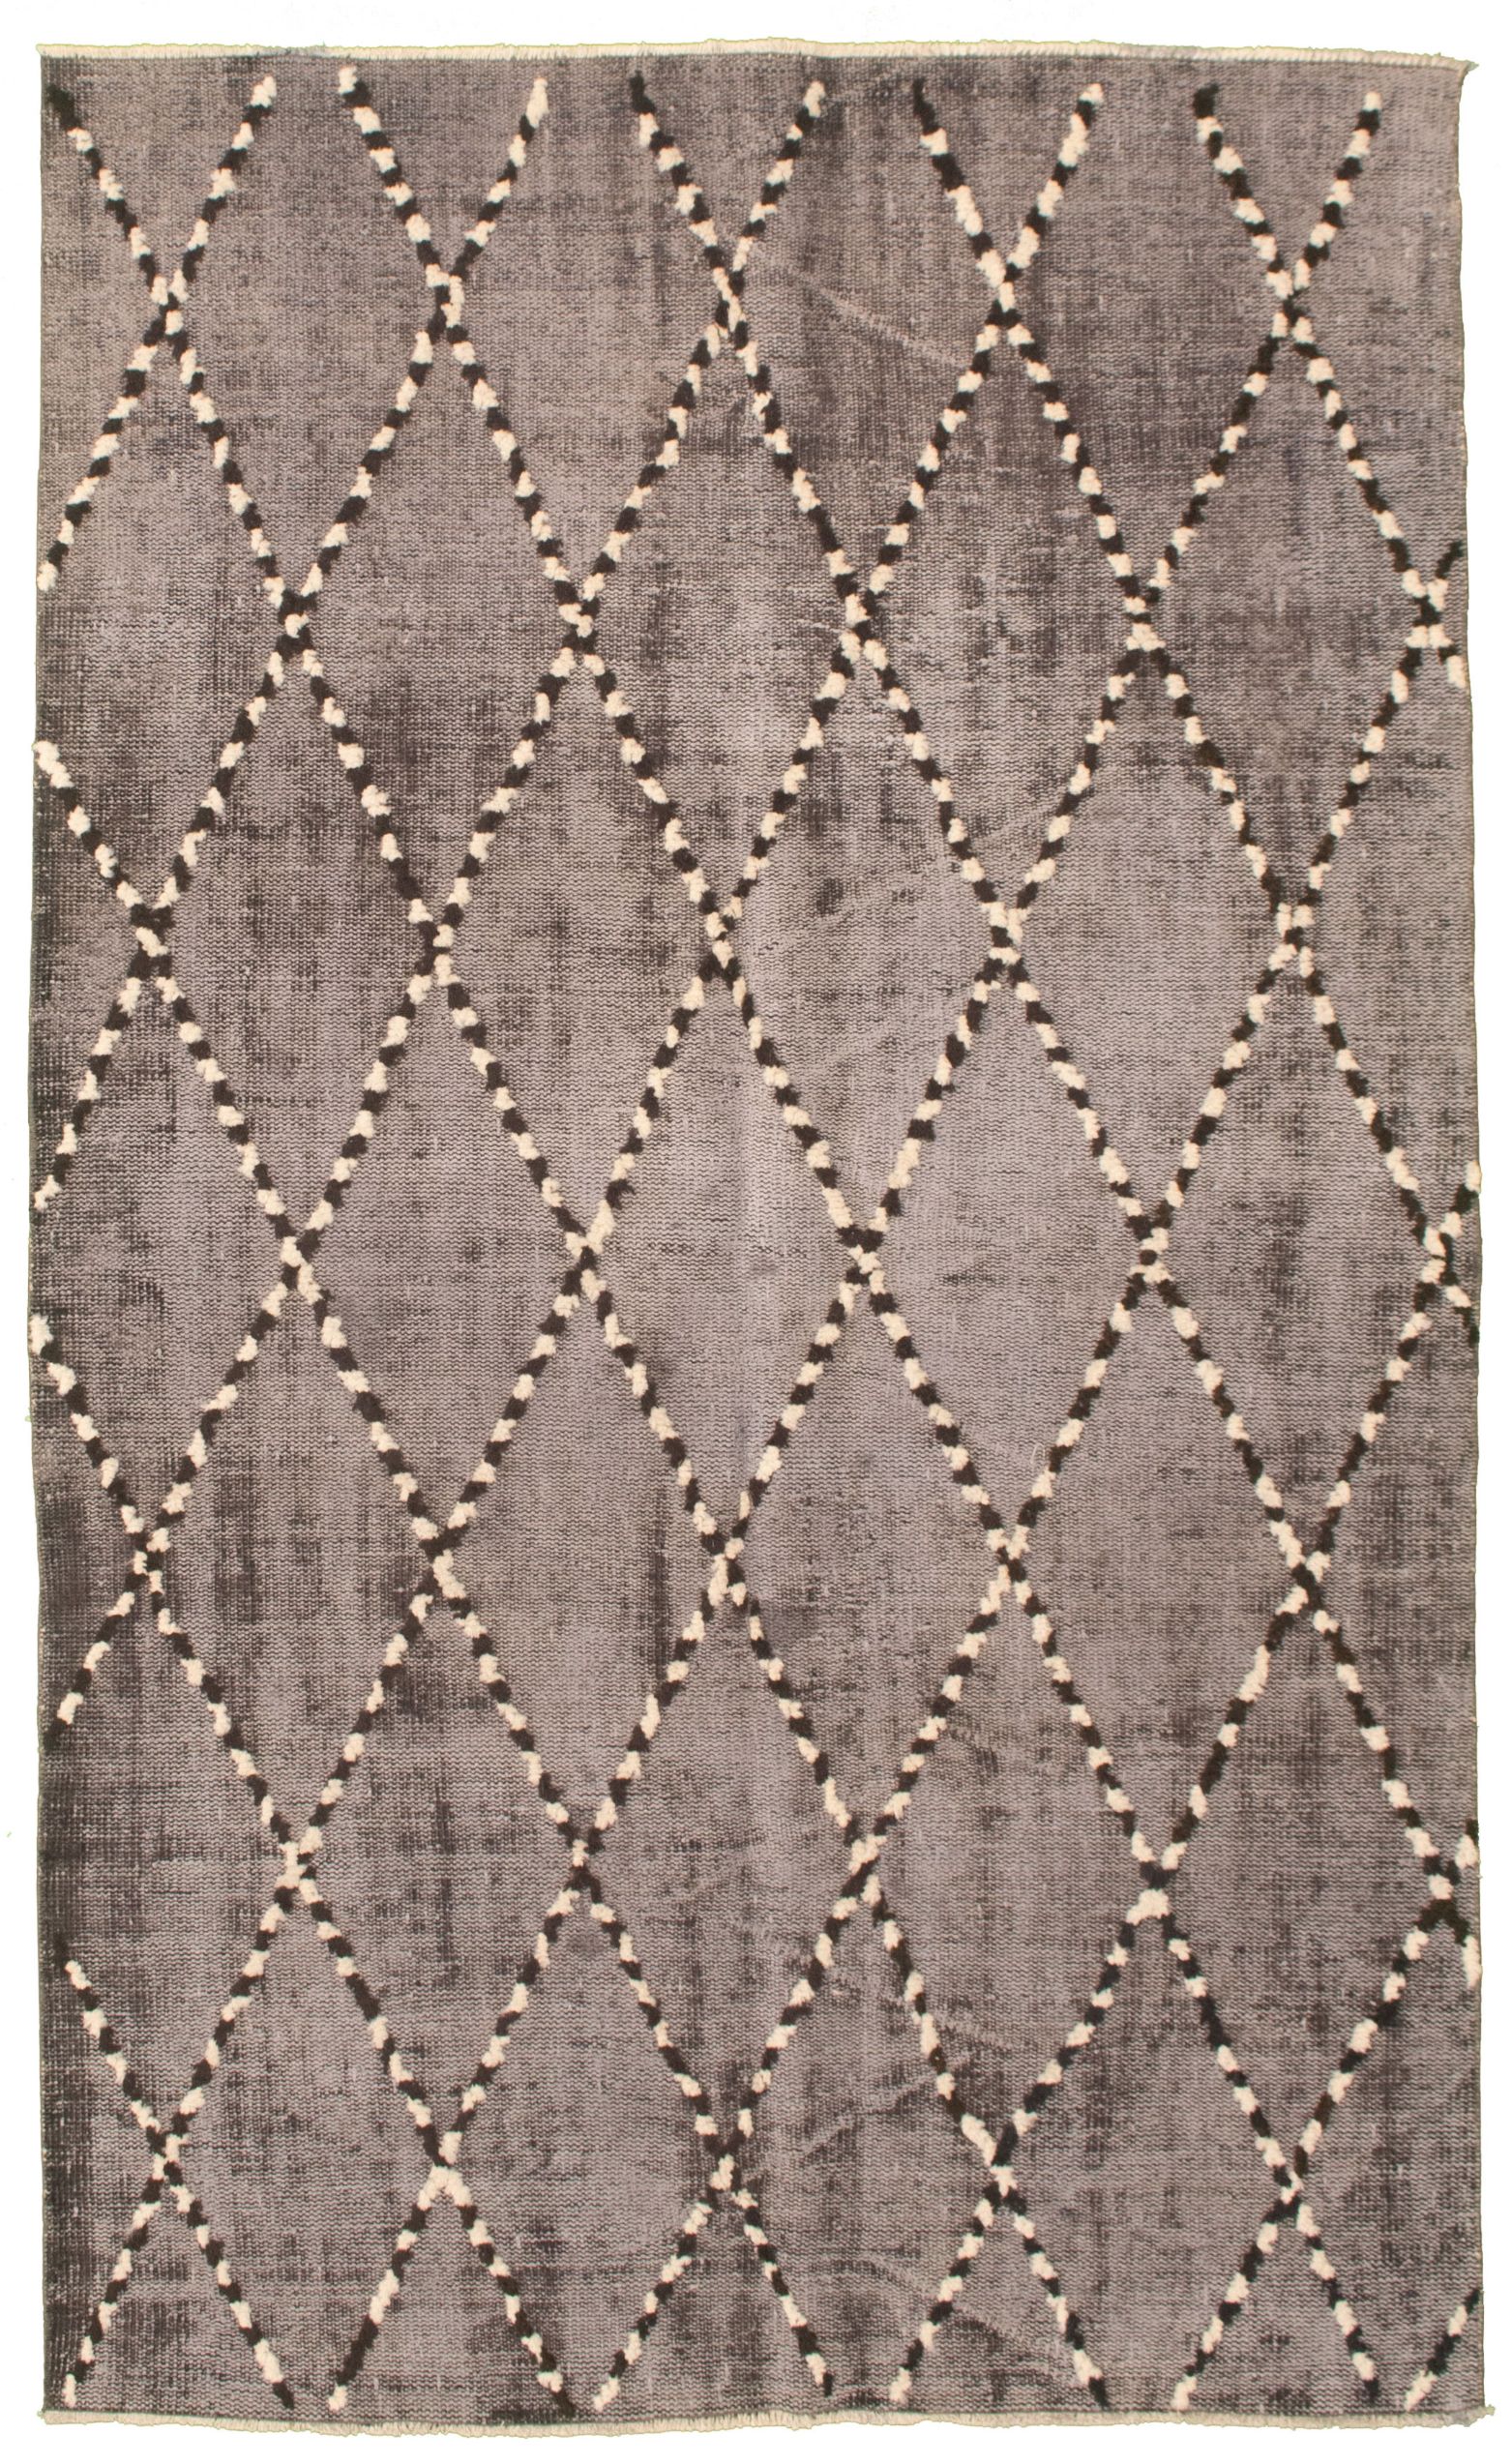 Hand-knotted Color Transition Black, Grey Wool Rug 4'11" x 8'4" Size: 4'11" x 8'4"  